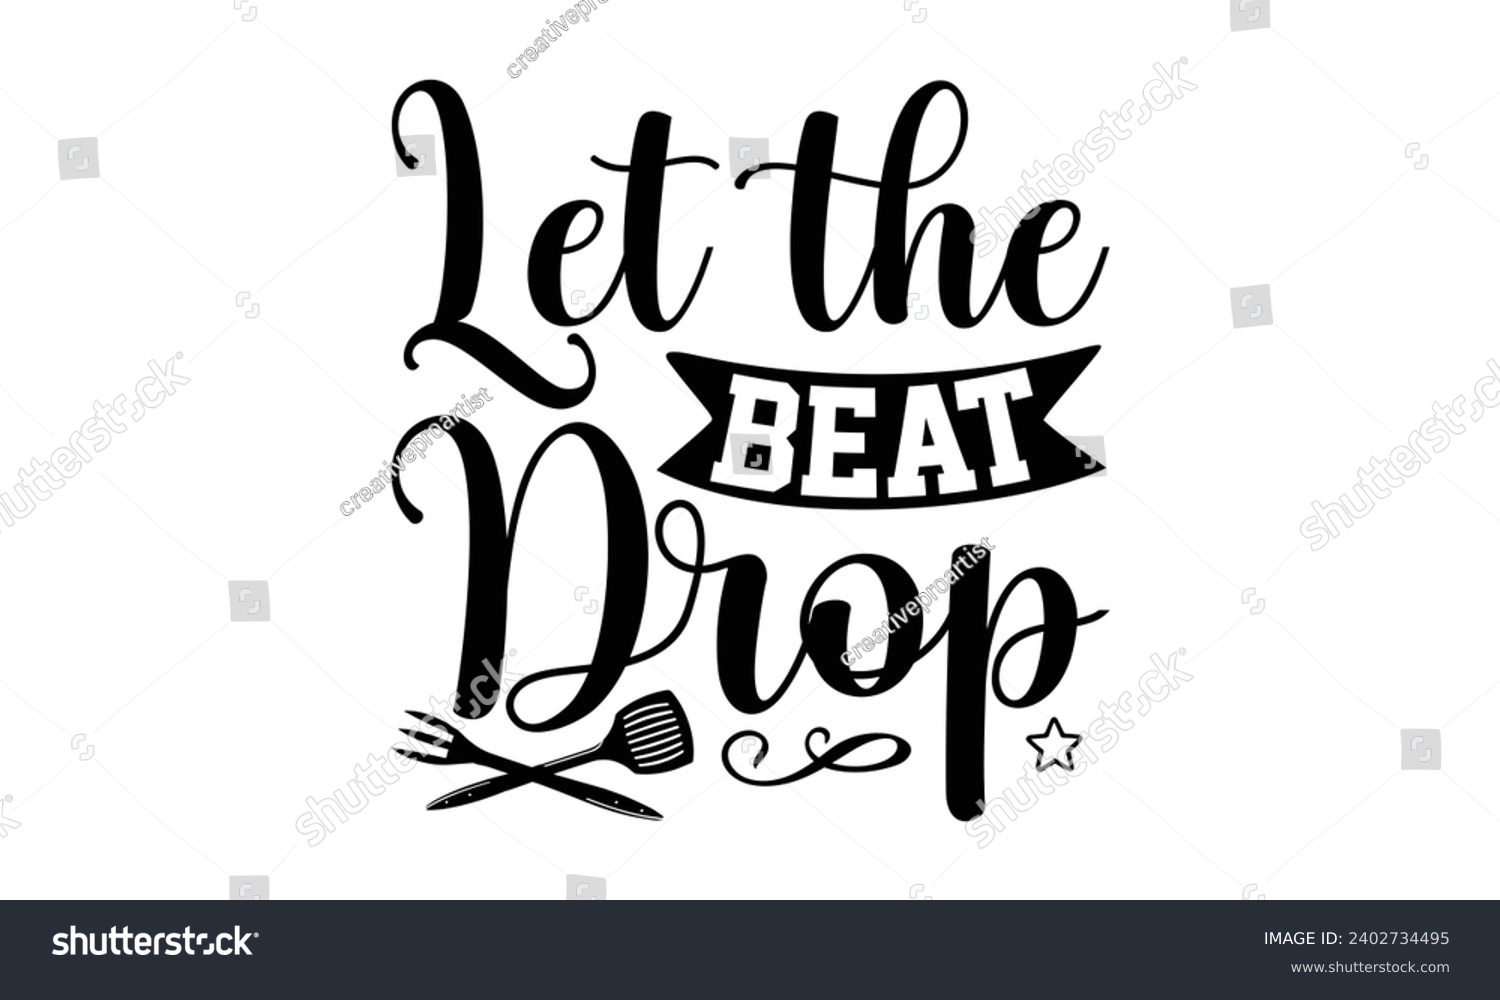 SVG of Let The Beat Drop- Baking t- shirt design, This illustration can be used as a print on Template bags, stationary or as a poster, Isolated on white background. svg